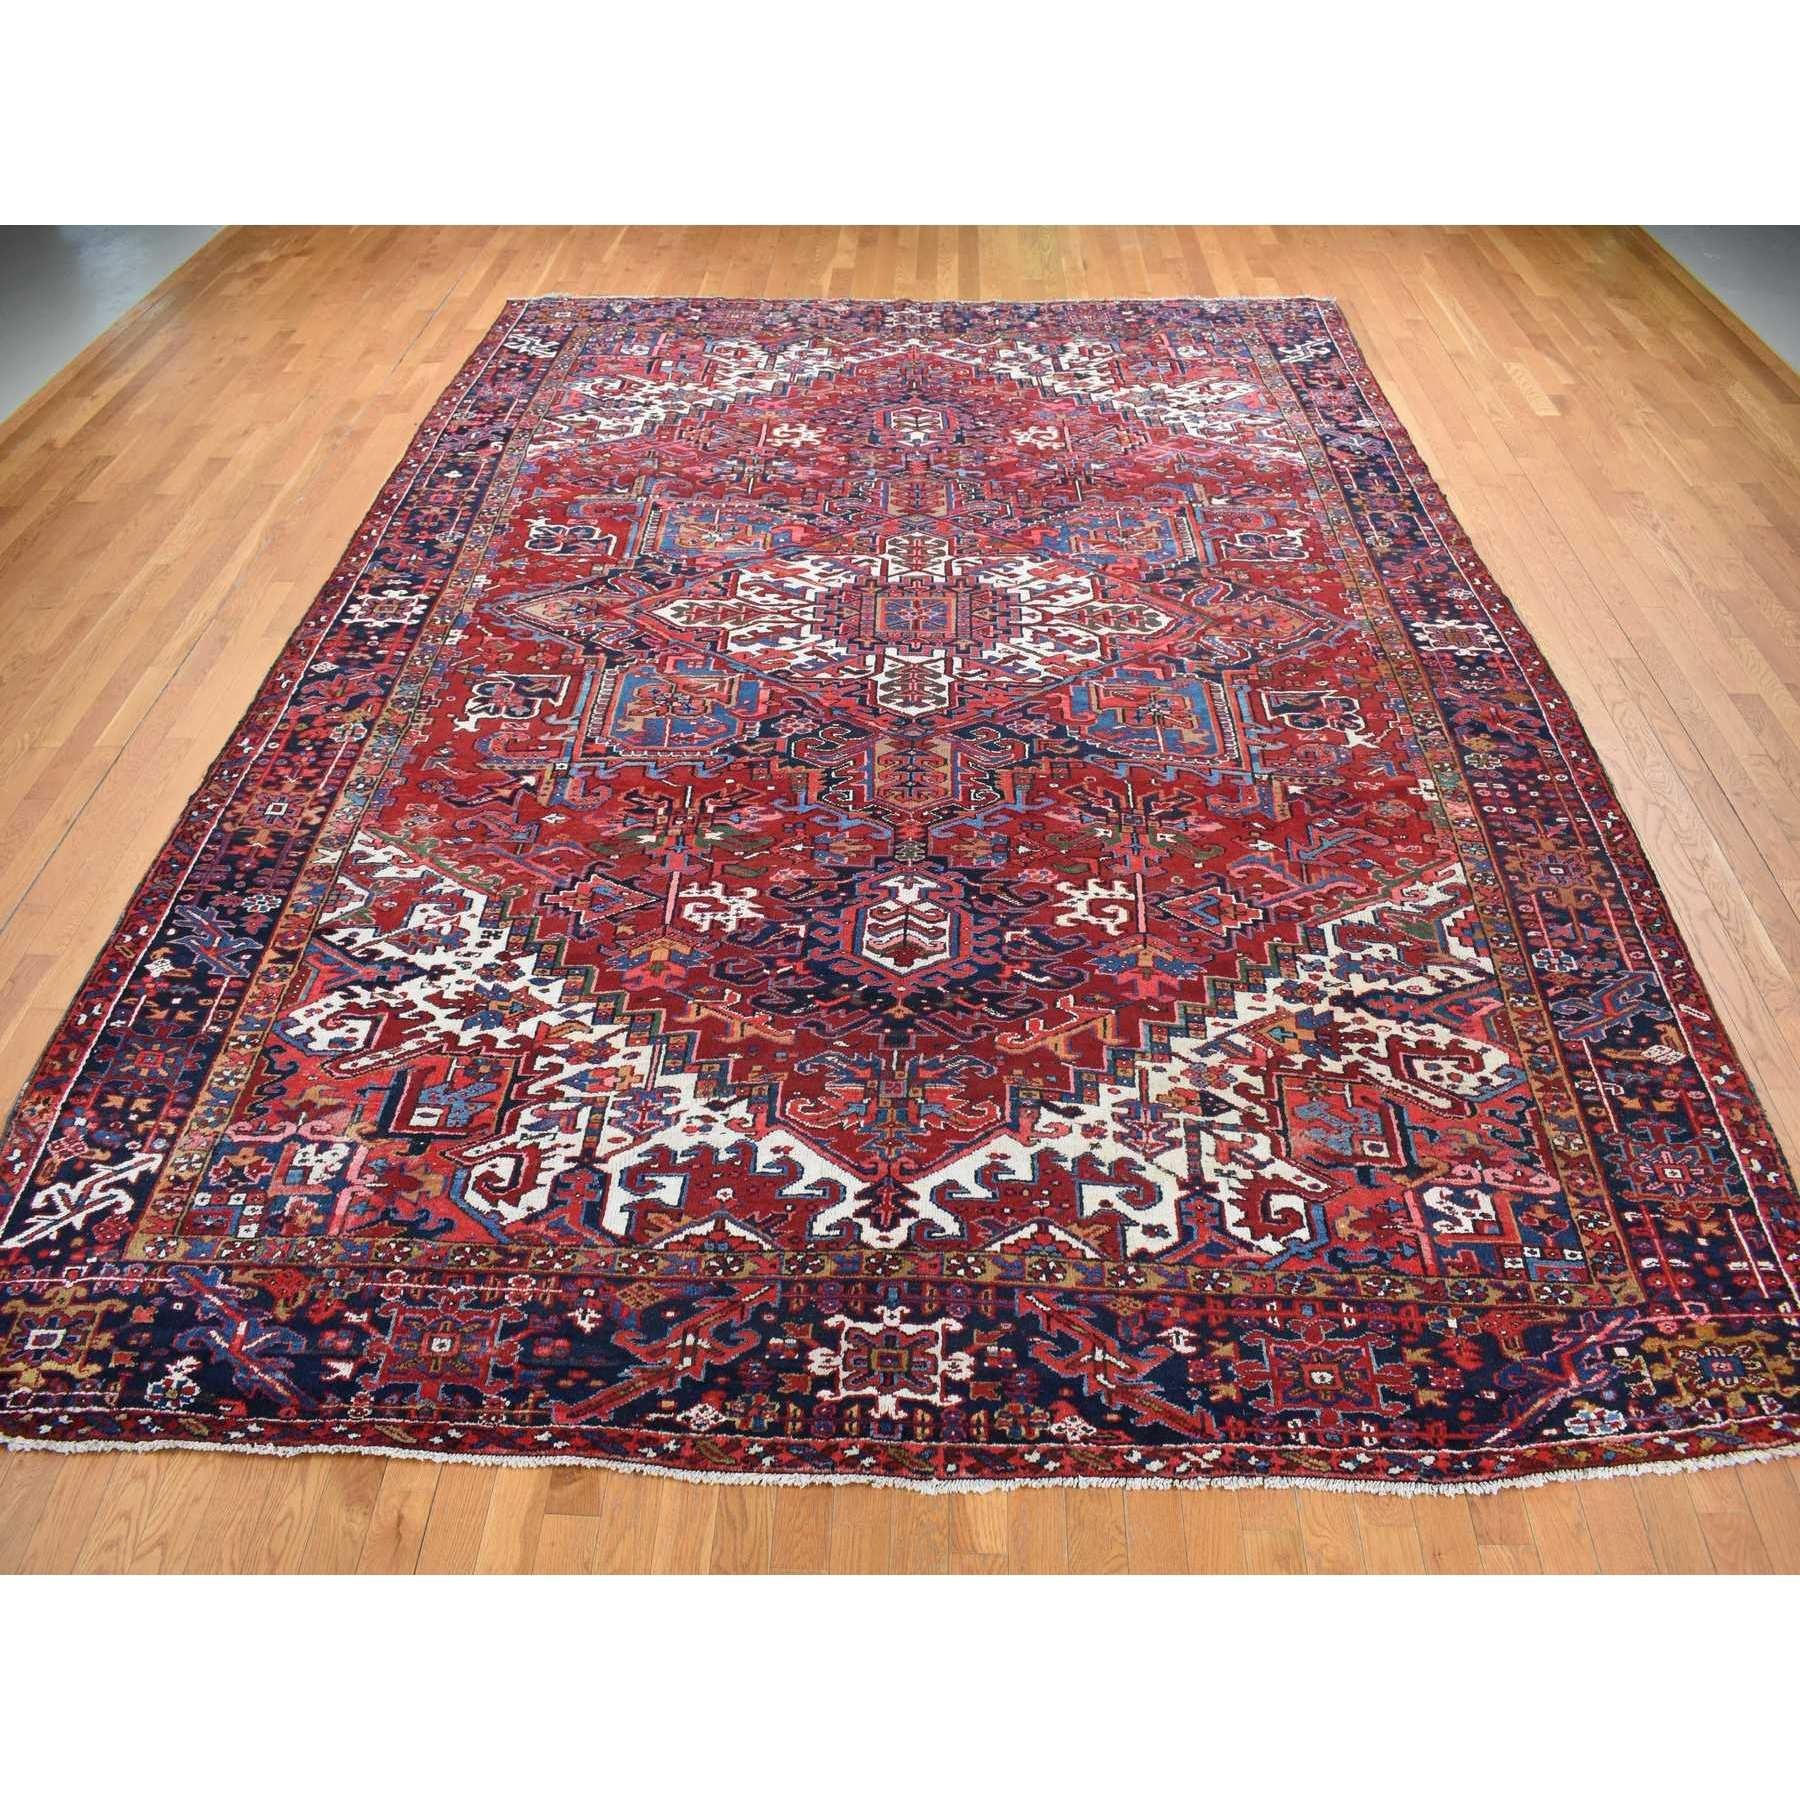 This fabulous Hand-Knotted carpet has been created and designed for extra strength and durability. This rug has been handcrafted for weeks in the traditional method that is used to make
Exact Rug Size in Feet and Inches : 10'6